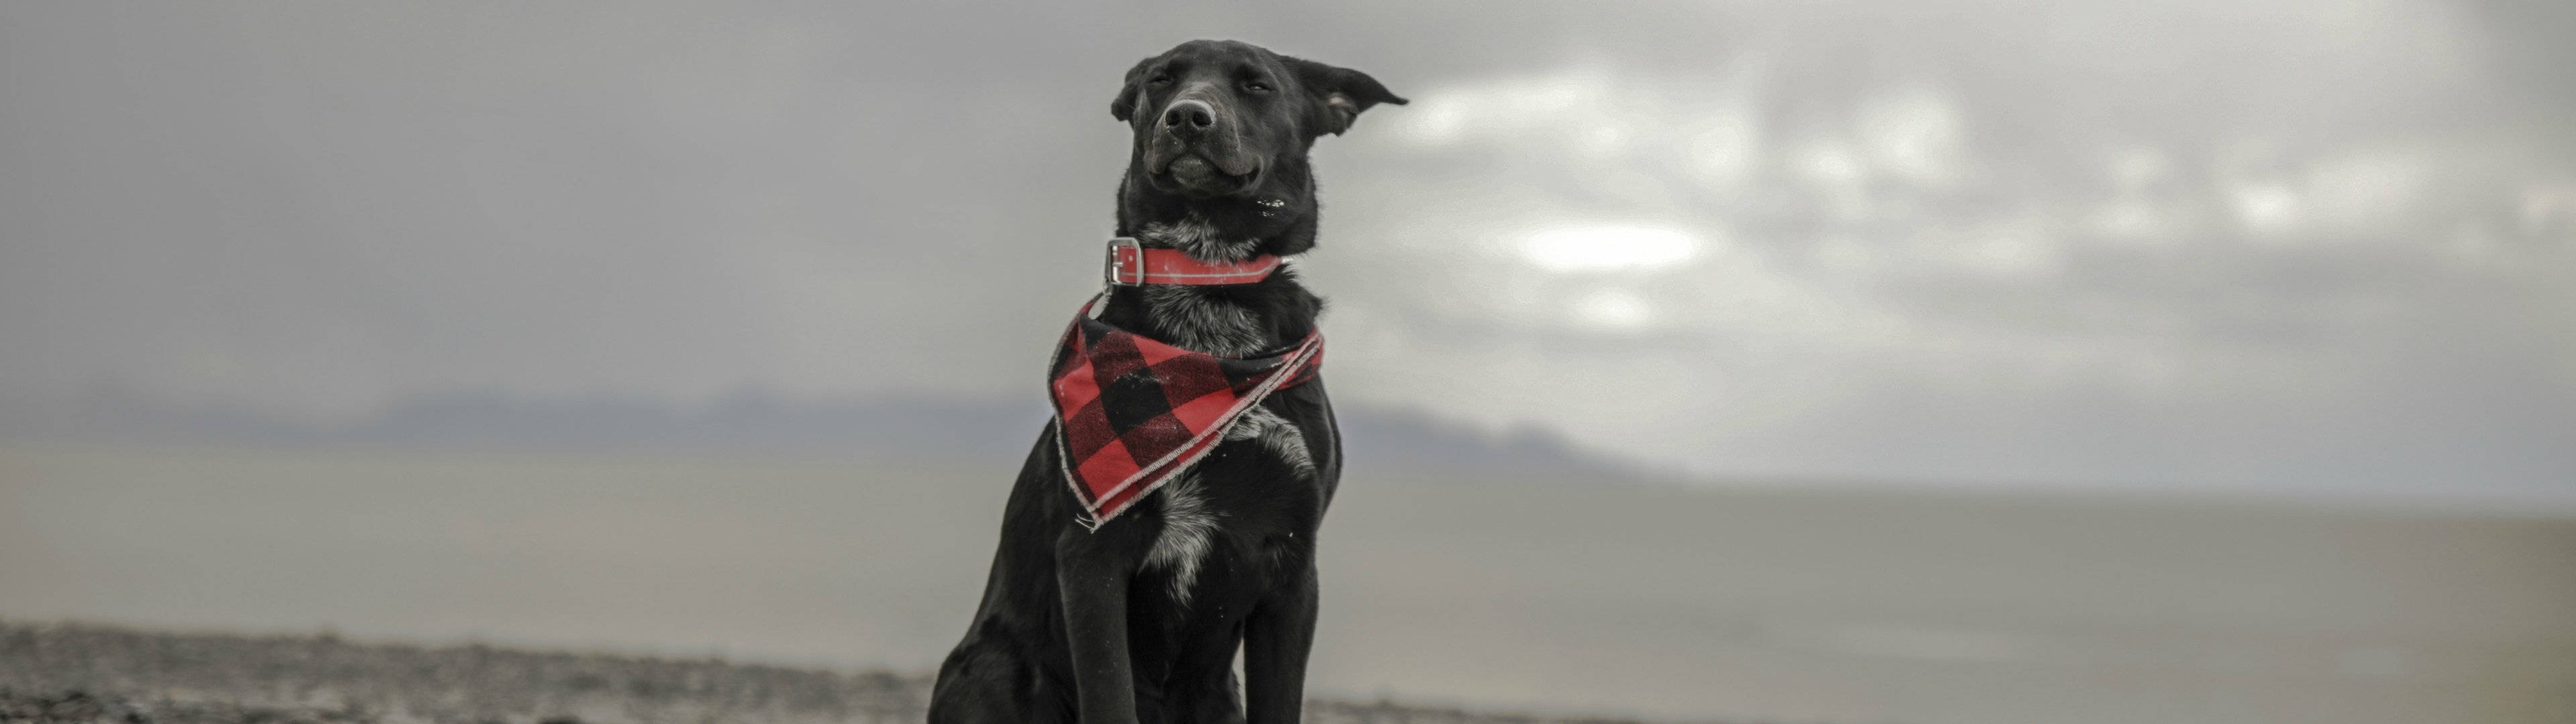 3840x1080 4K Dog With Scarf Wallpaper